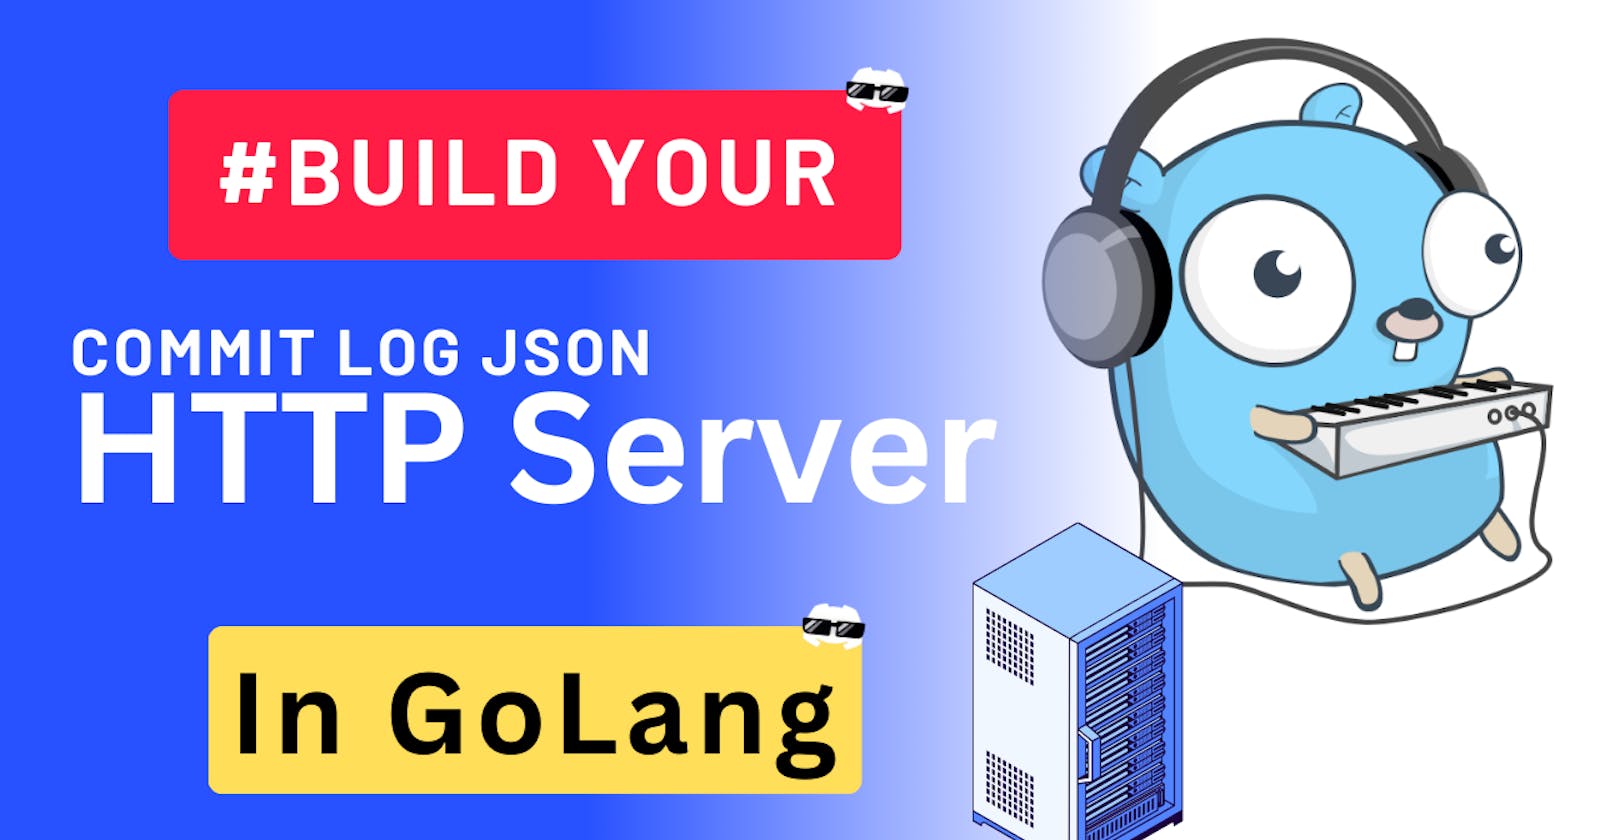 Build your HTTP Server in GoLang for Commit Log JSON